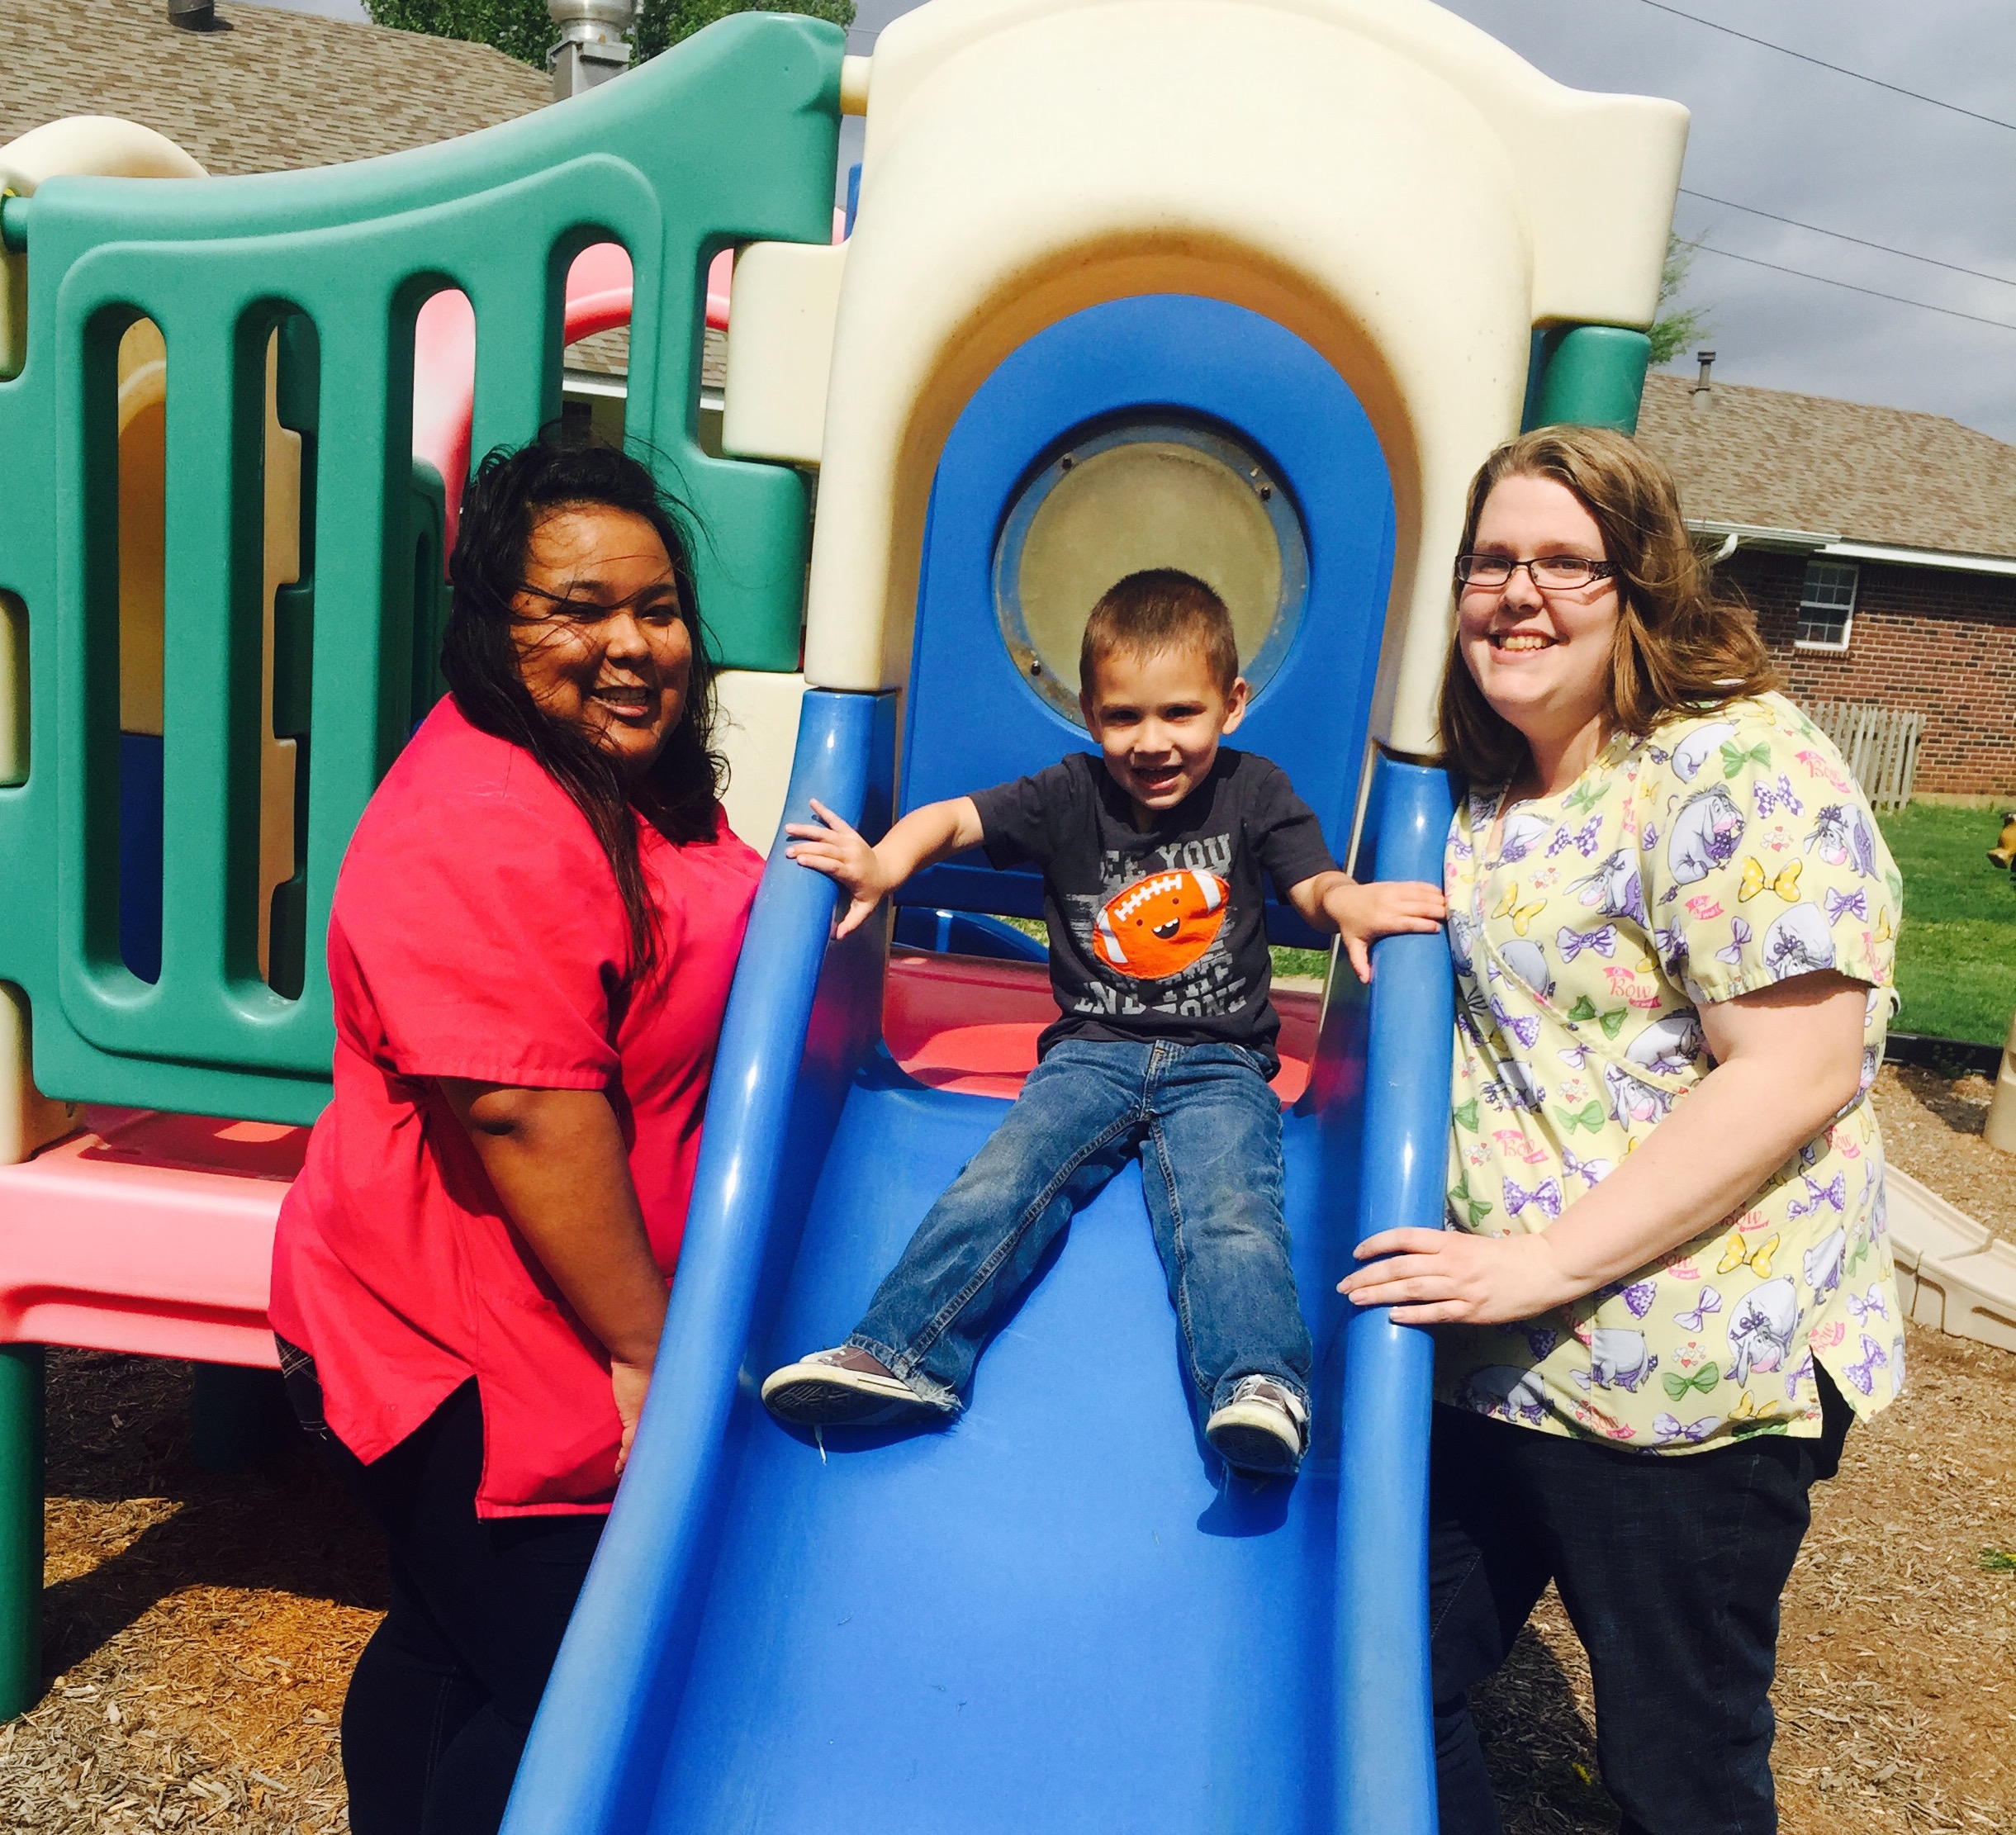 A picture of a boy and teachers on a playground